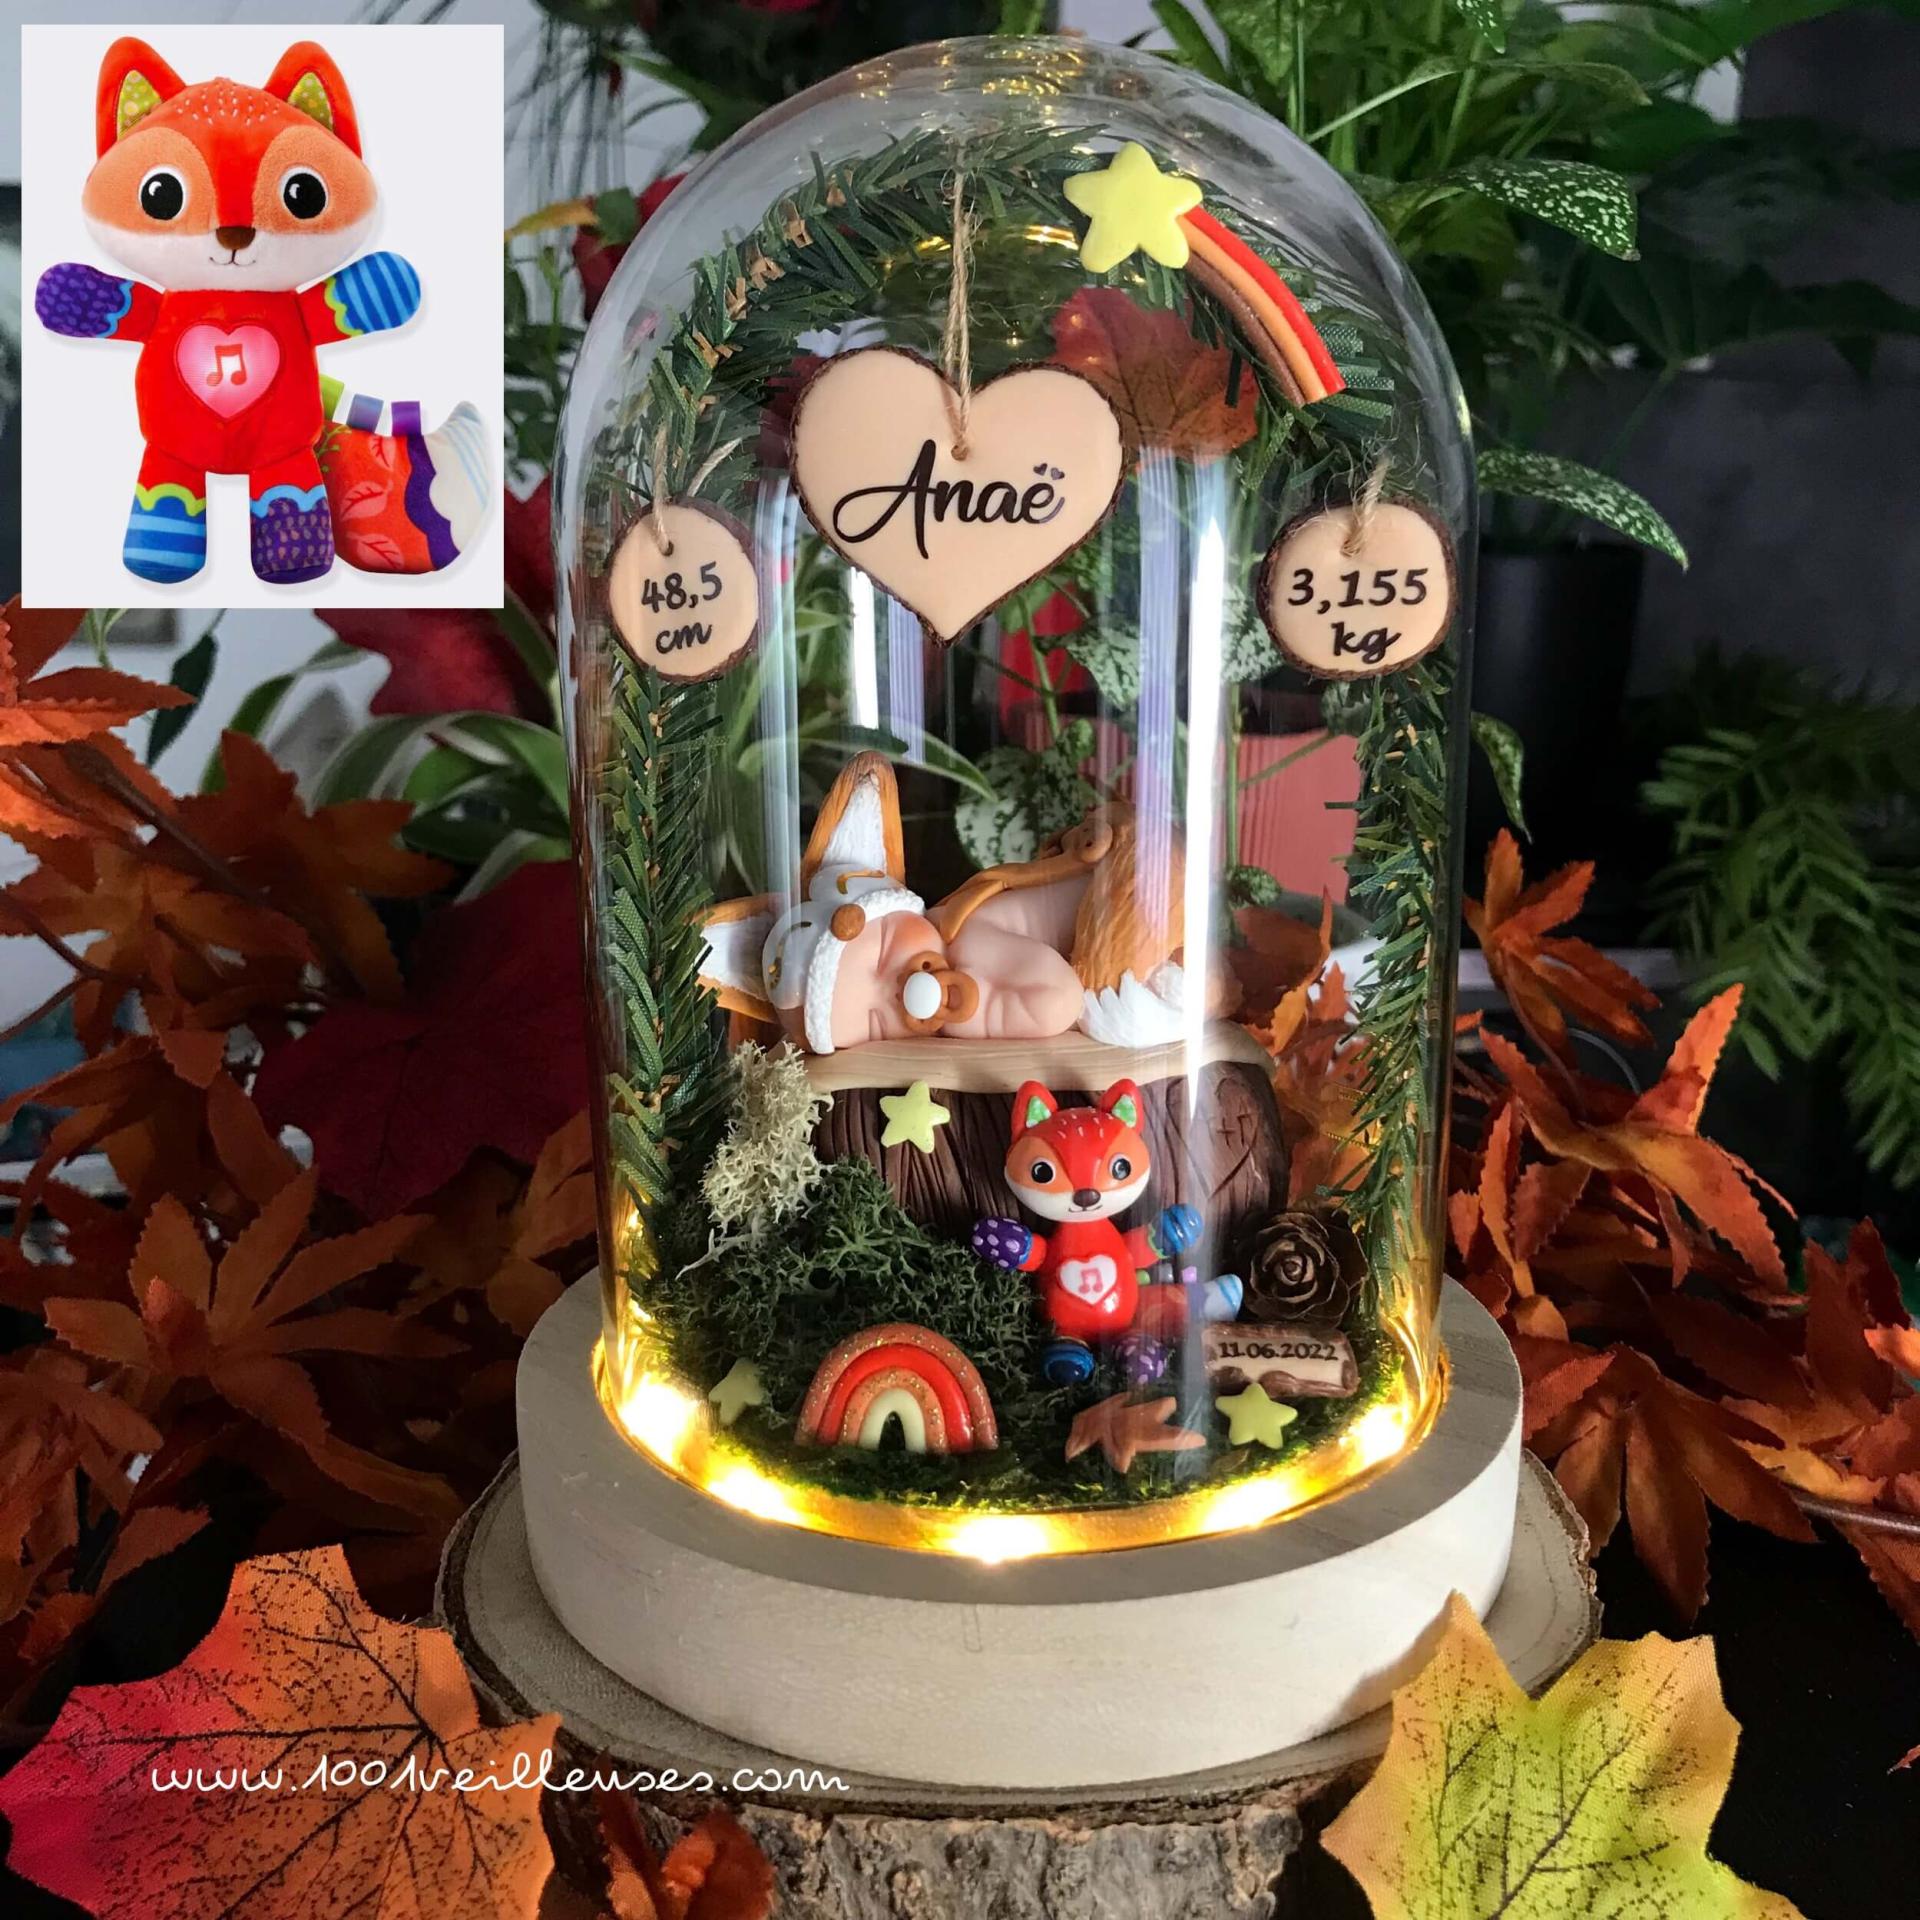 Handcrafted nightlight under a glass bell, baby dressed as a fox, in an enchanted forest with a reproduction of its fox cuddly toy